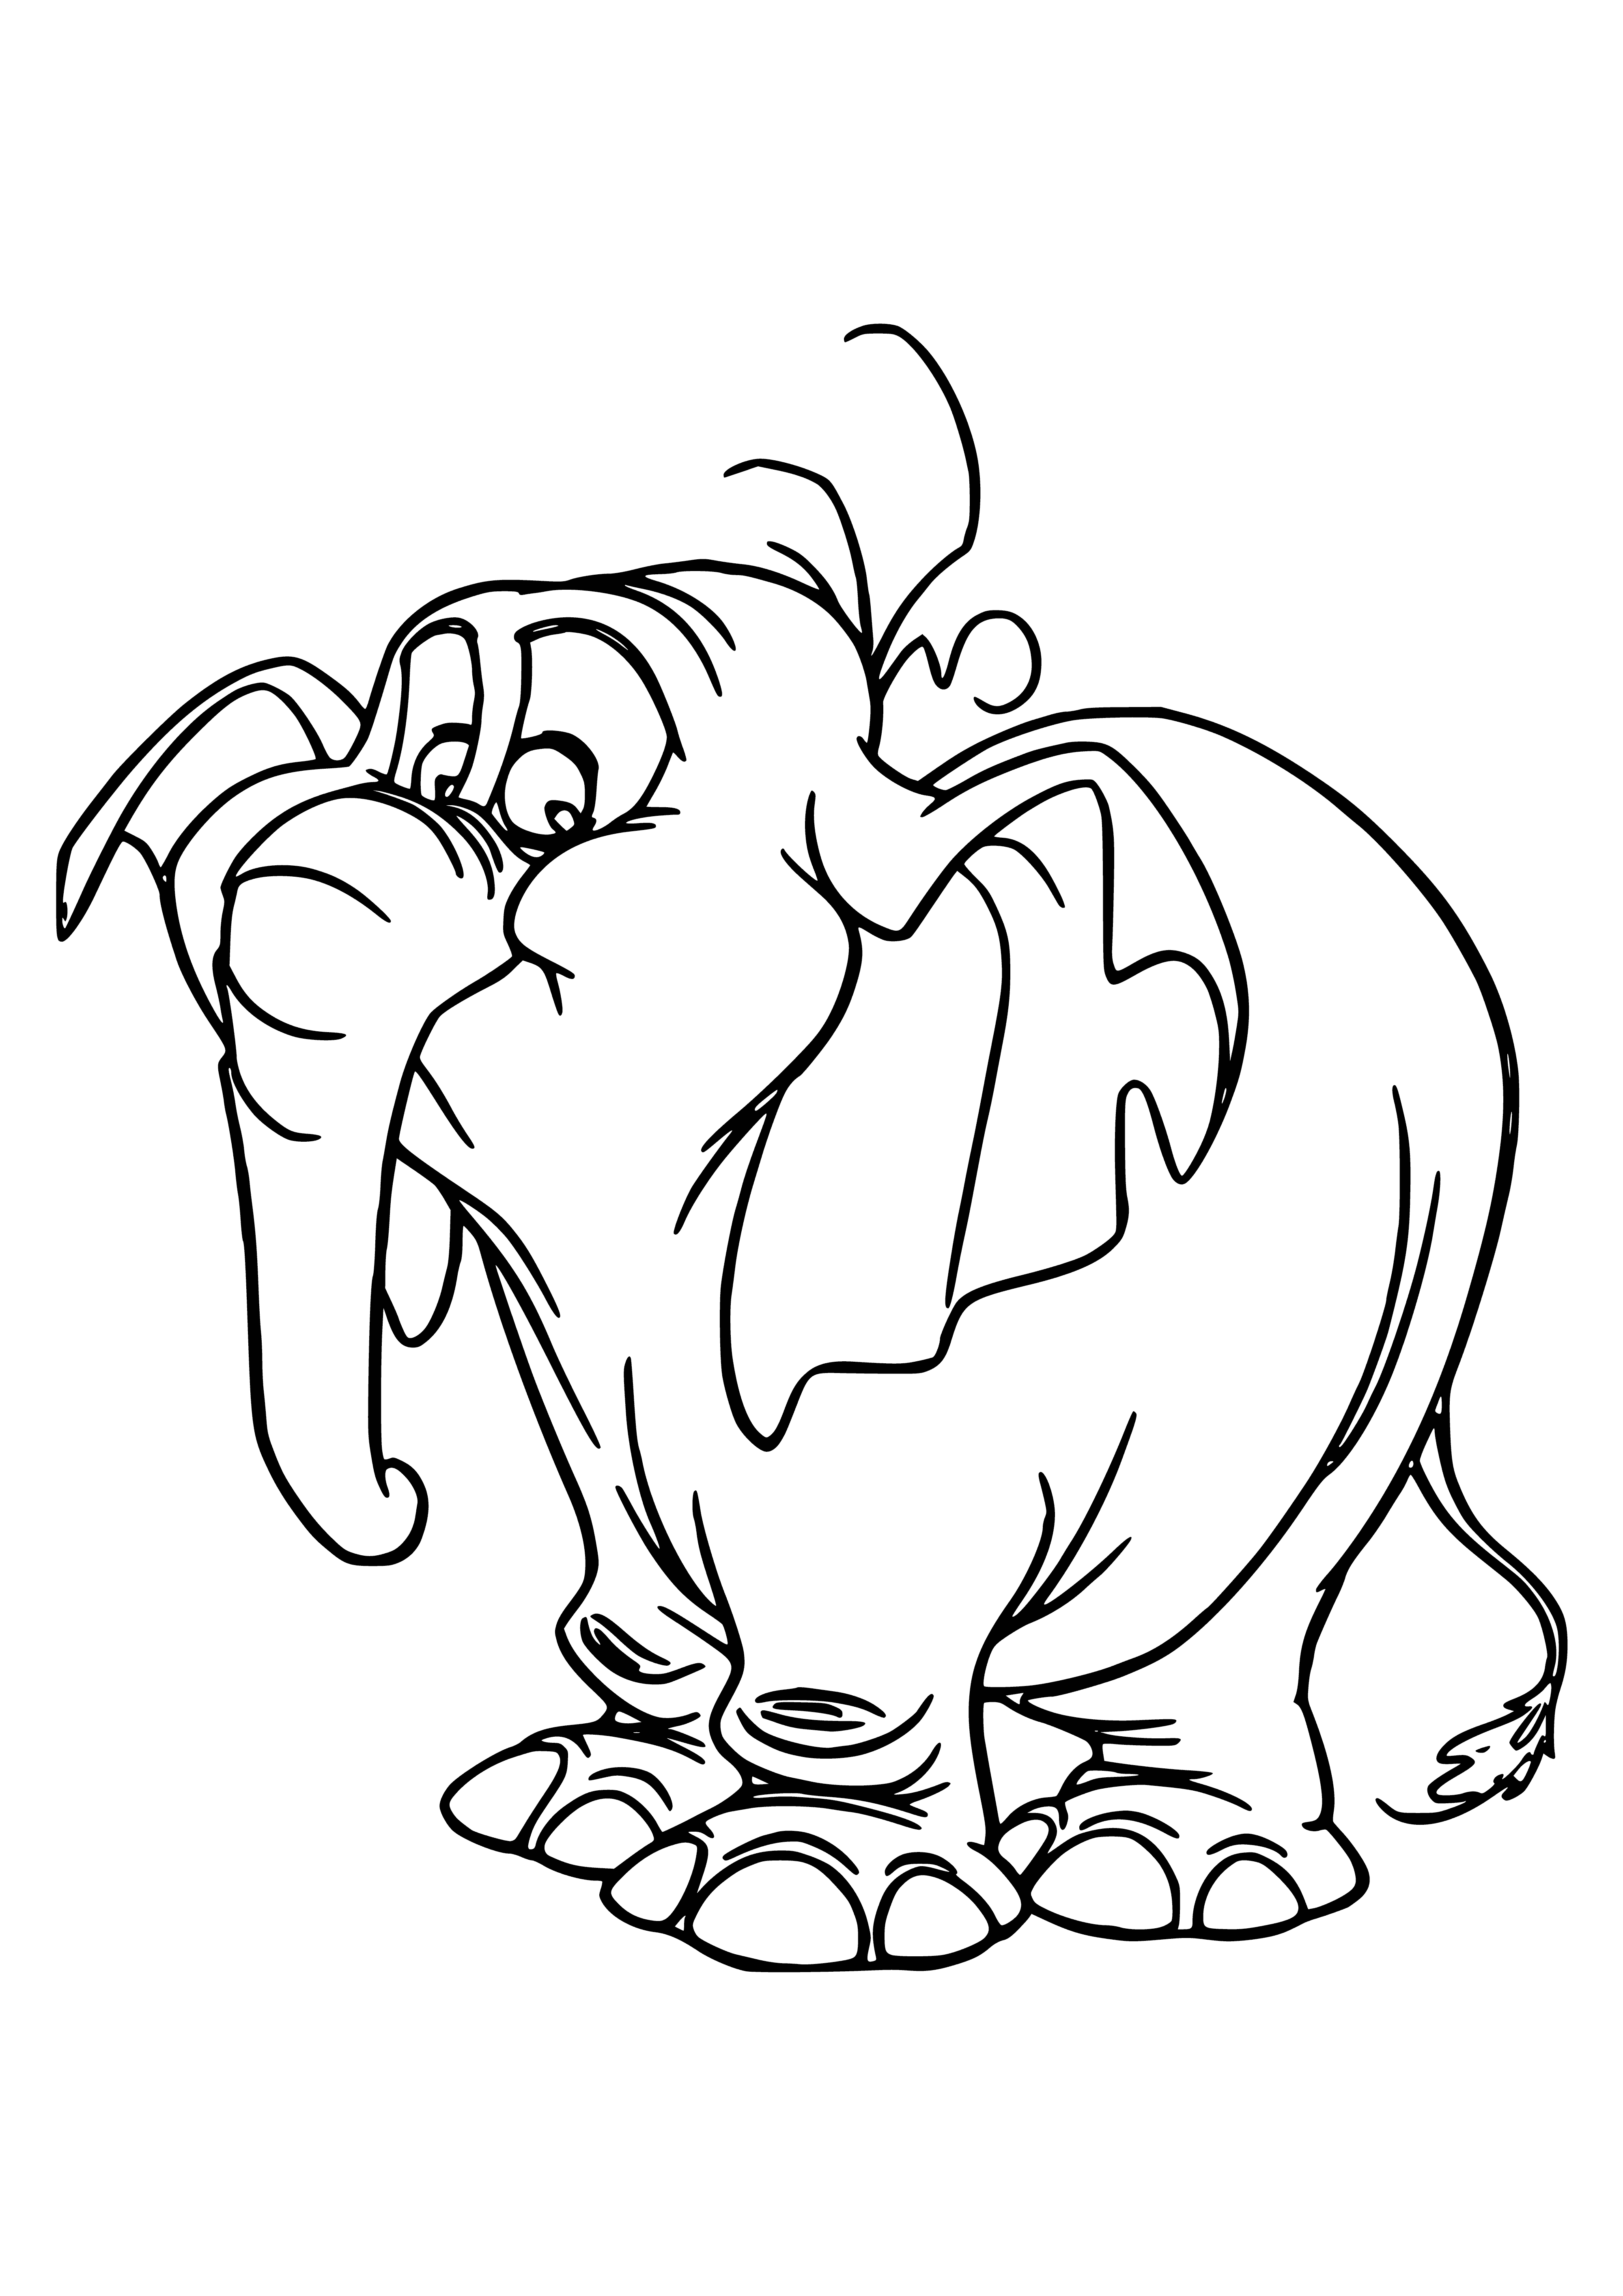 coloring page: A light-colored elephant stands on a dirt path in a jungle, with trees and vines around him. He has a long trunk, large ears and curved tusks.